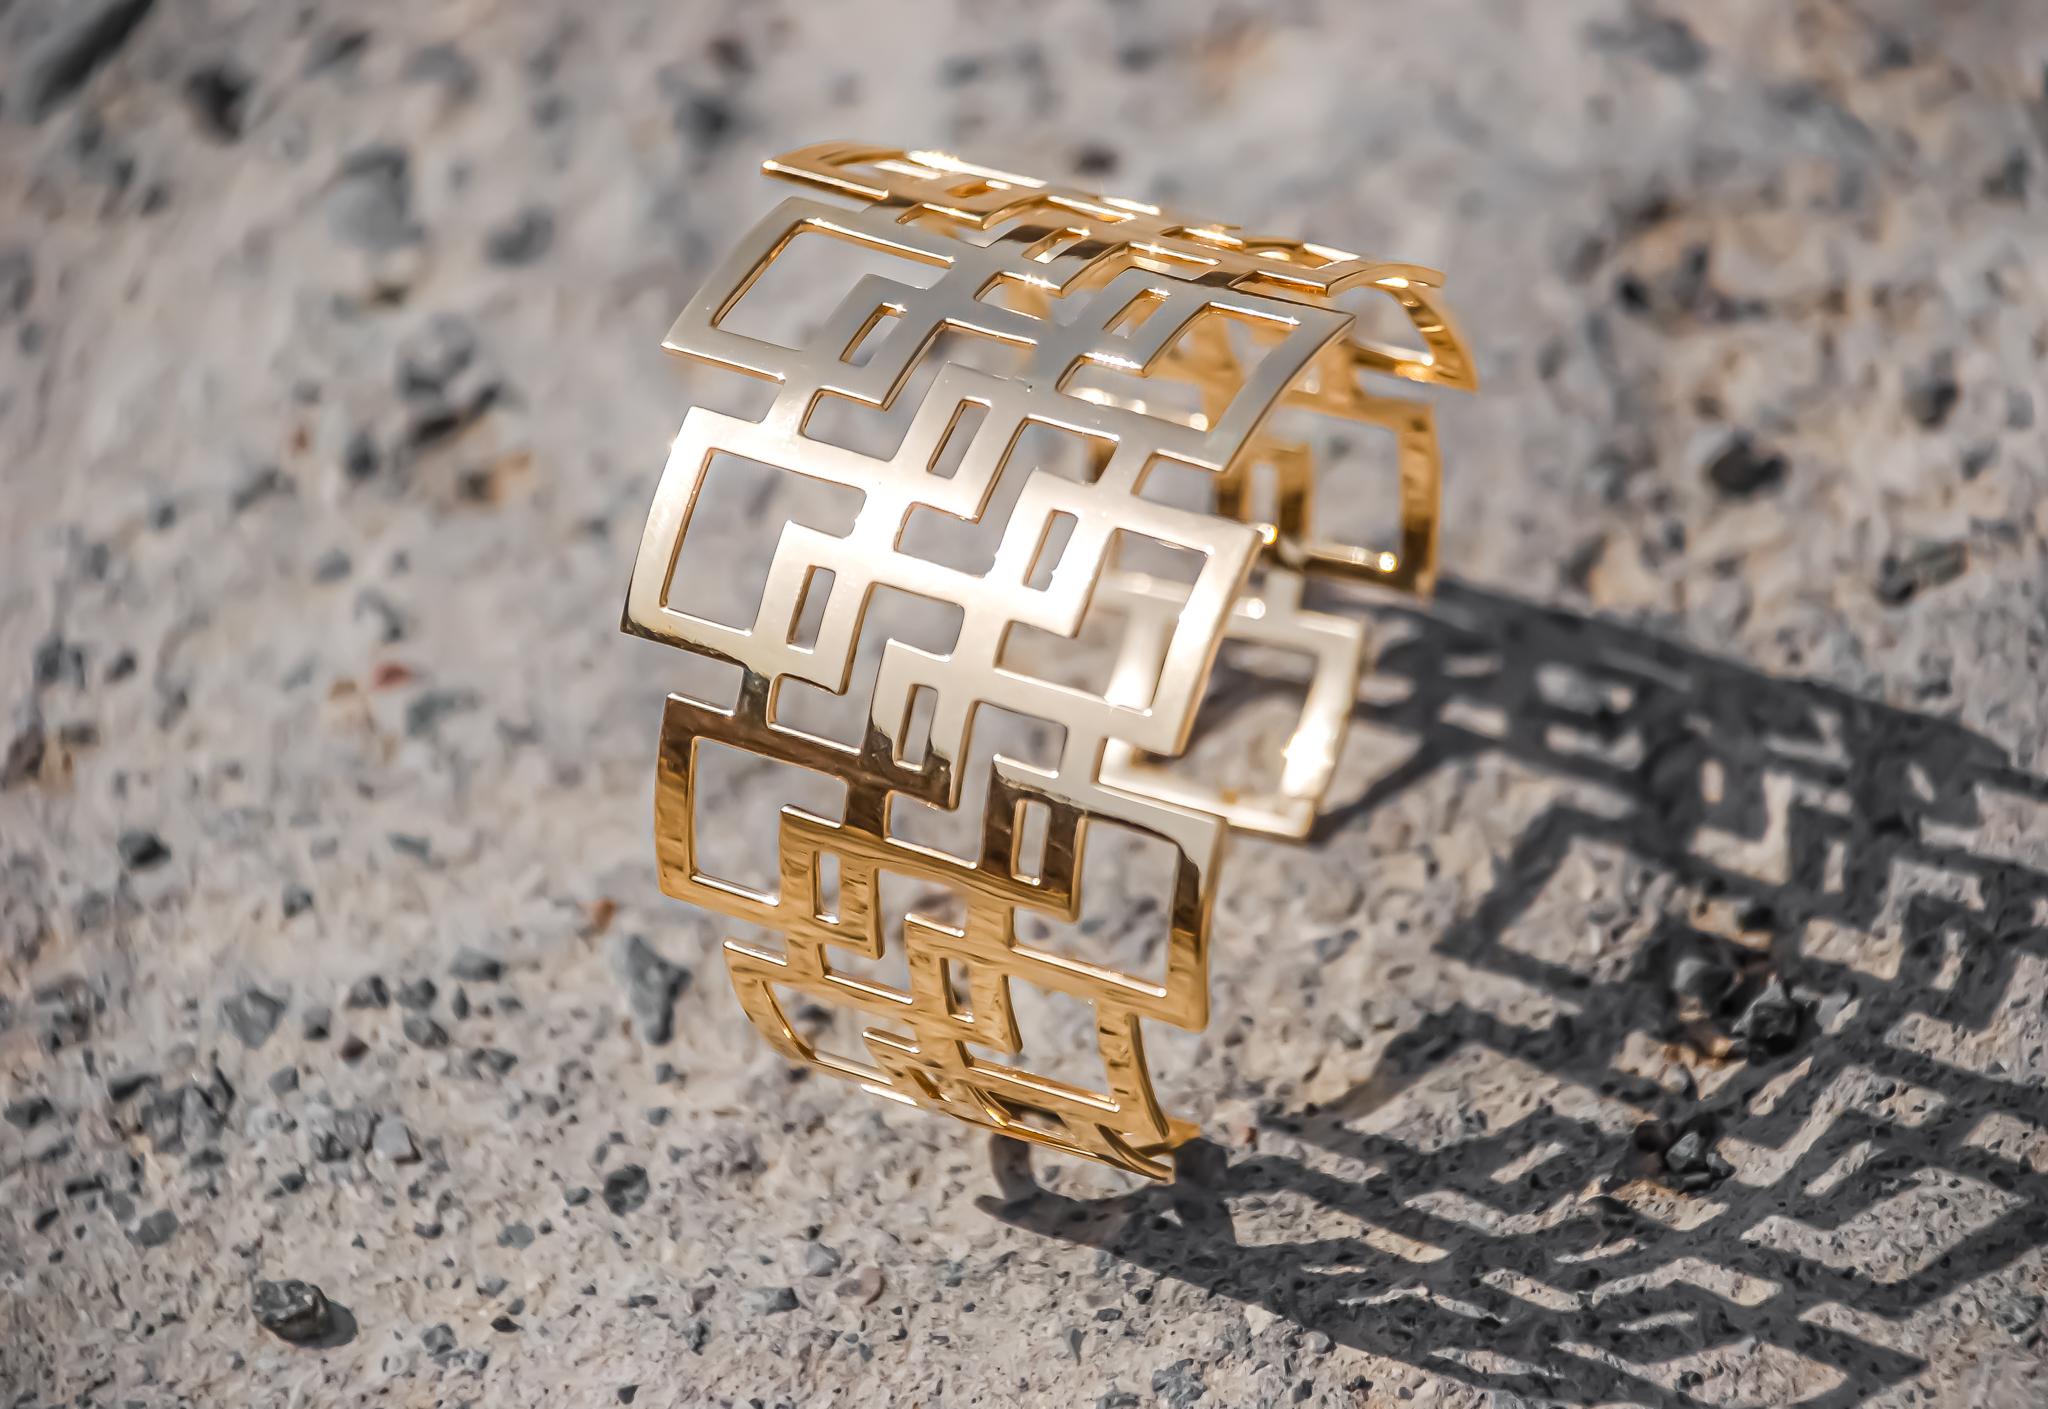 18kt solid yellow gold cuff by Mohamad Kamra - 'Geometric Design Cuff Bracelet'

Cuff can be made in any wrist size.